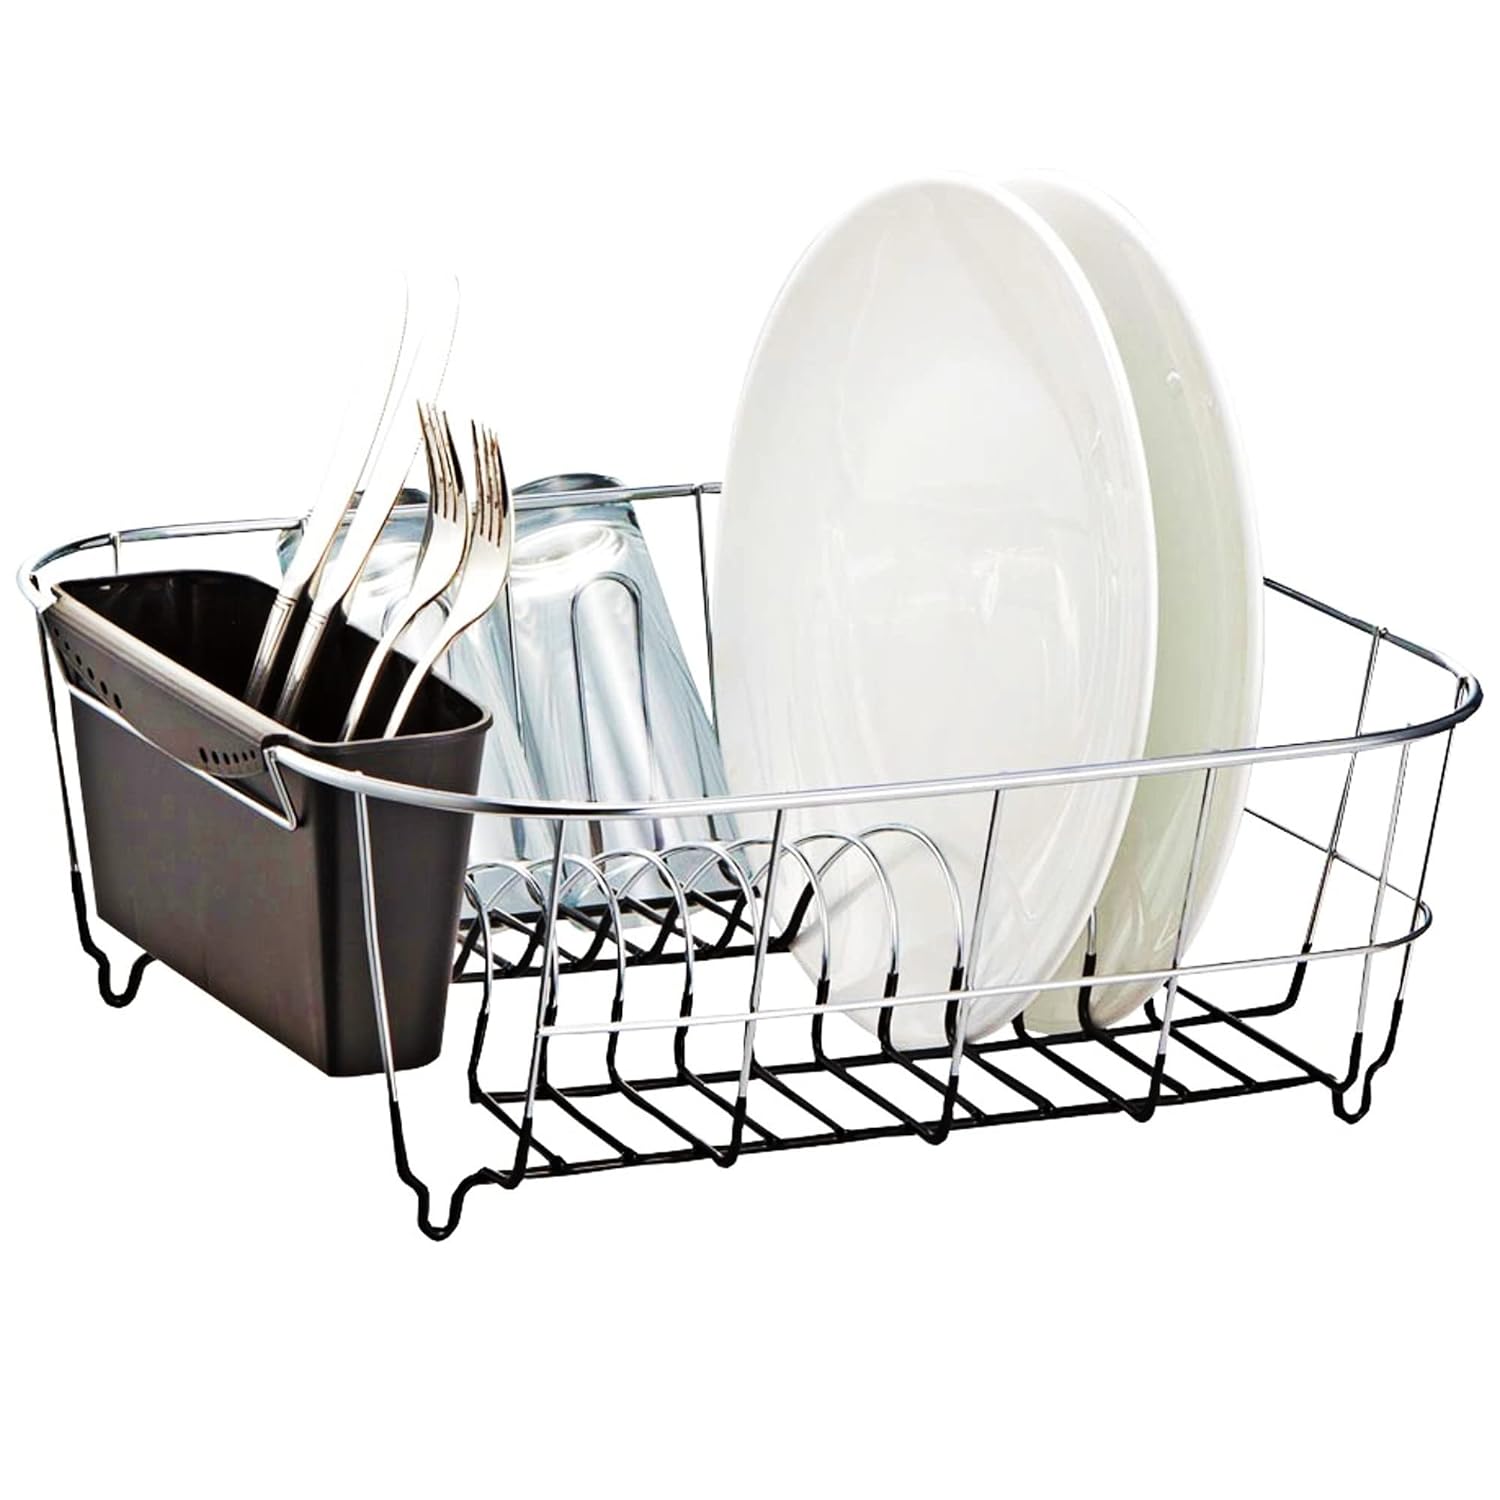 thinkstar Deluxe Chrome-Plated Steel Small Dish Drainers (Black)